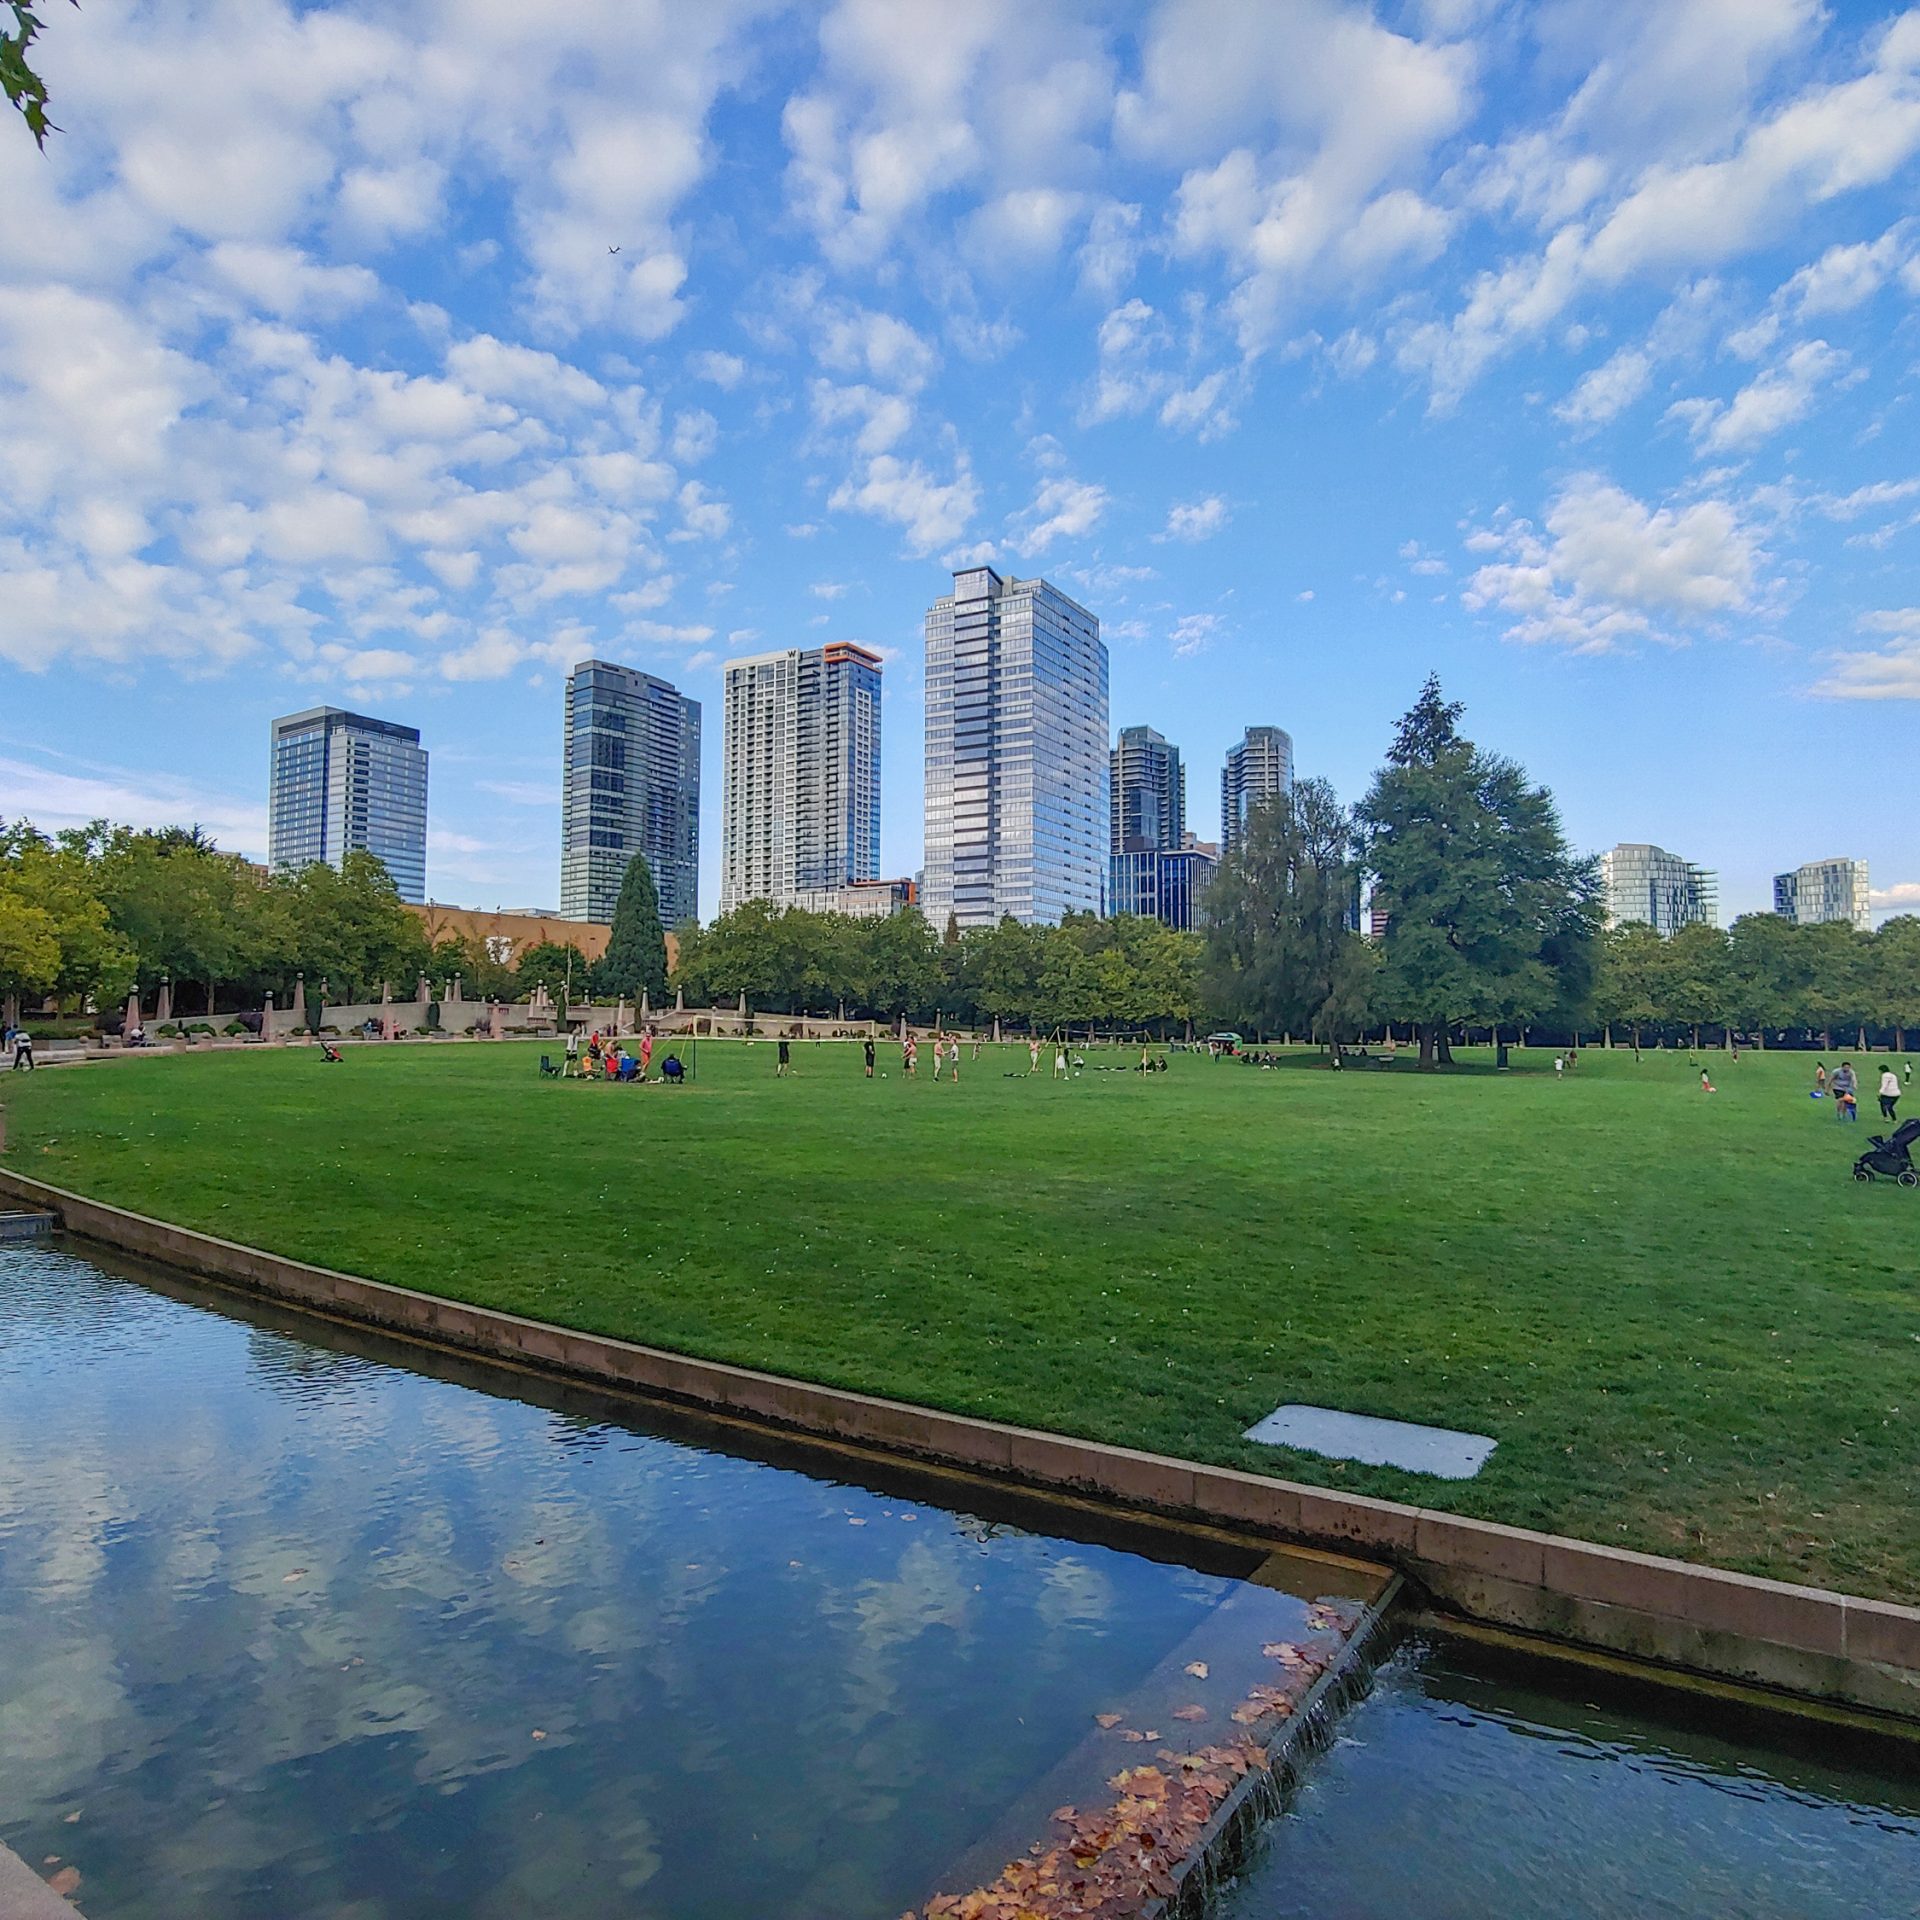 Bellevue Downtown Park is park located in the heart of downtown Bellevue, WA. The park was designed for passive and unstructured use, and as a respite from the activities of busy urban life.